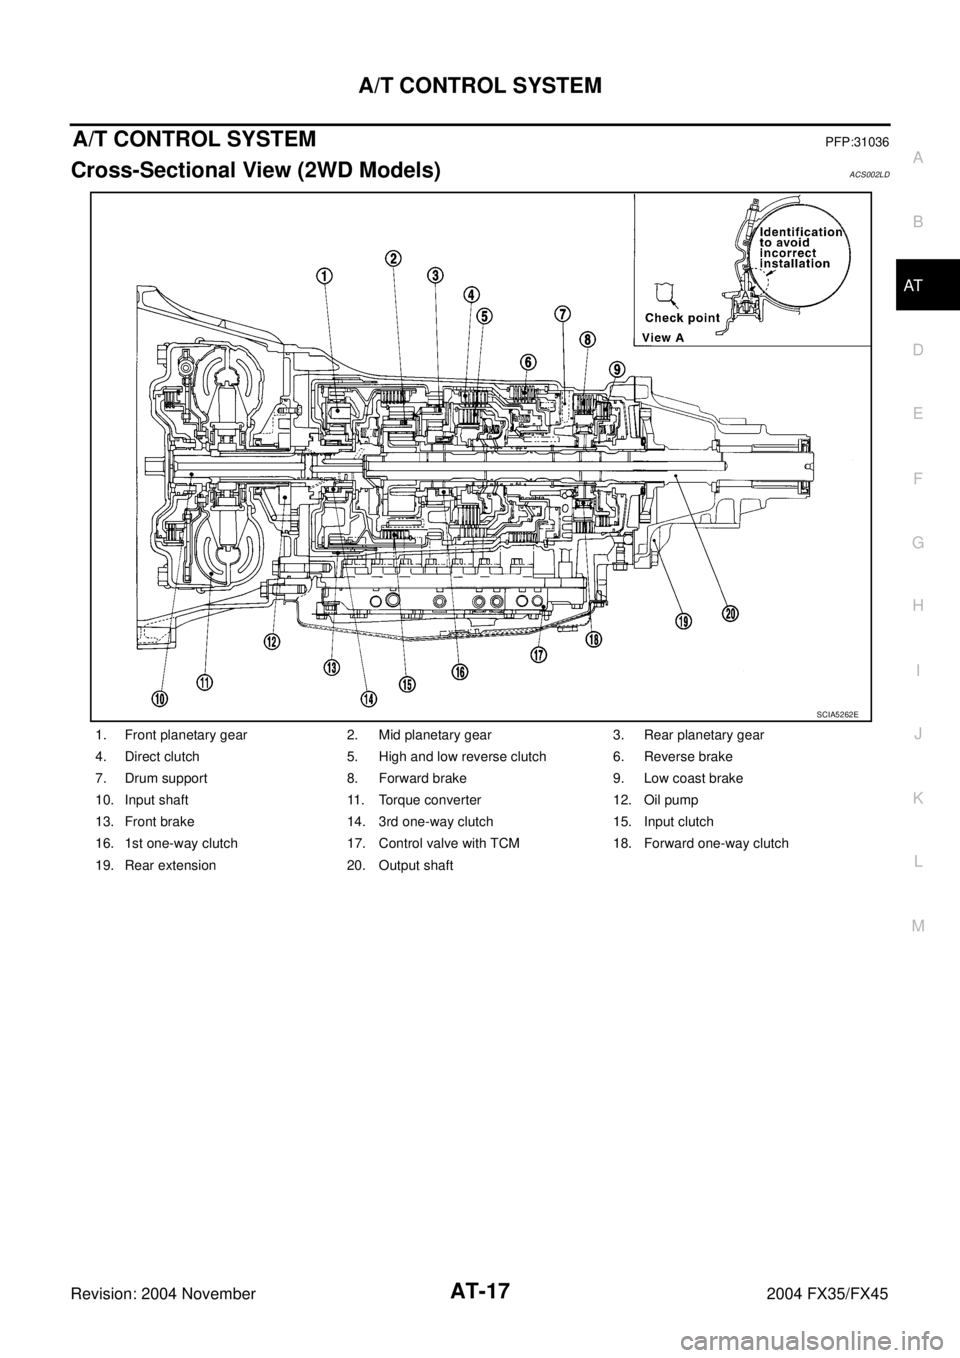 INFINITI FX35 2004  Service Manual A/T CONTROL SYSTEM
AT-17
D
E
F
G
H
I
J
K
L
MA
B
AT
Revision: 2004 November 2004 FX35/FX45
A/T CONTROL SYSTEMPFP:31036
Cross-Sectional View (2WD Models)ACS002LD
1. Front planetary gear 2. Mid planetary